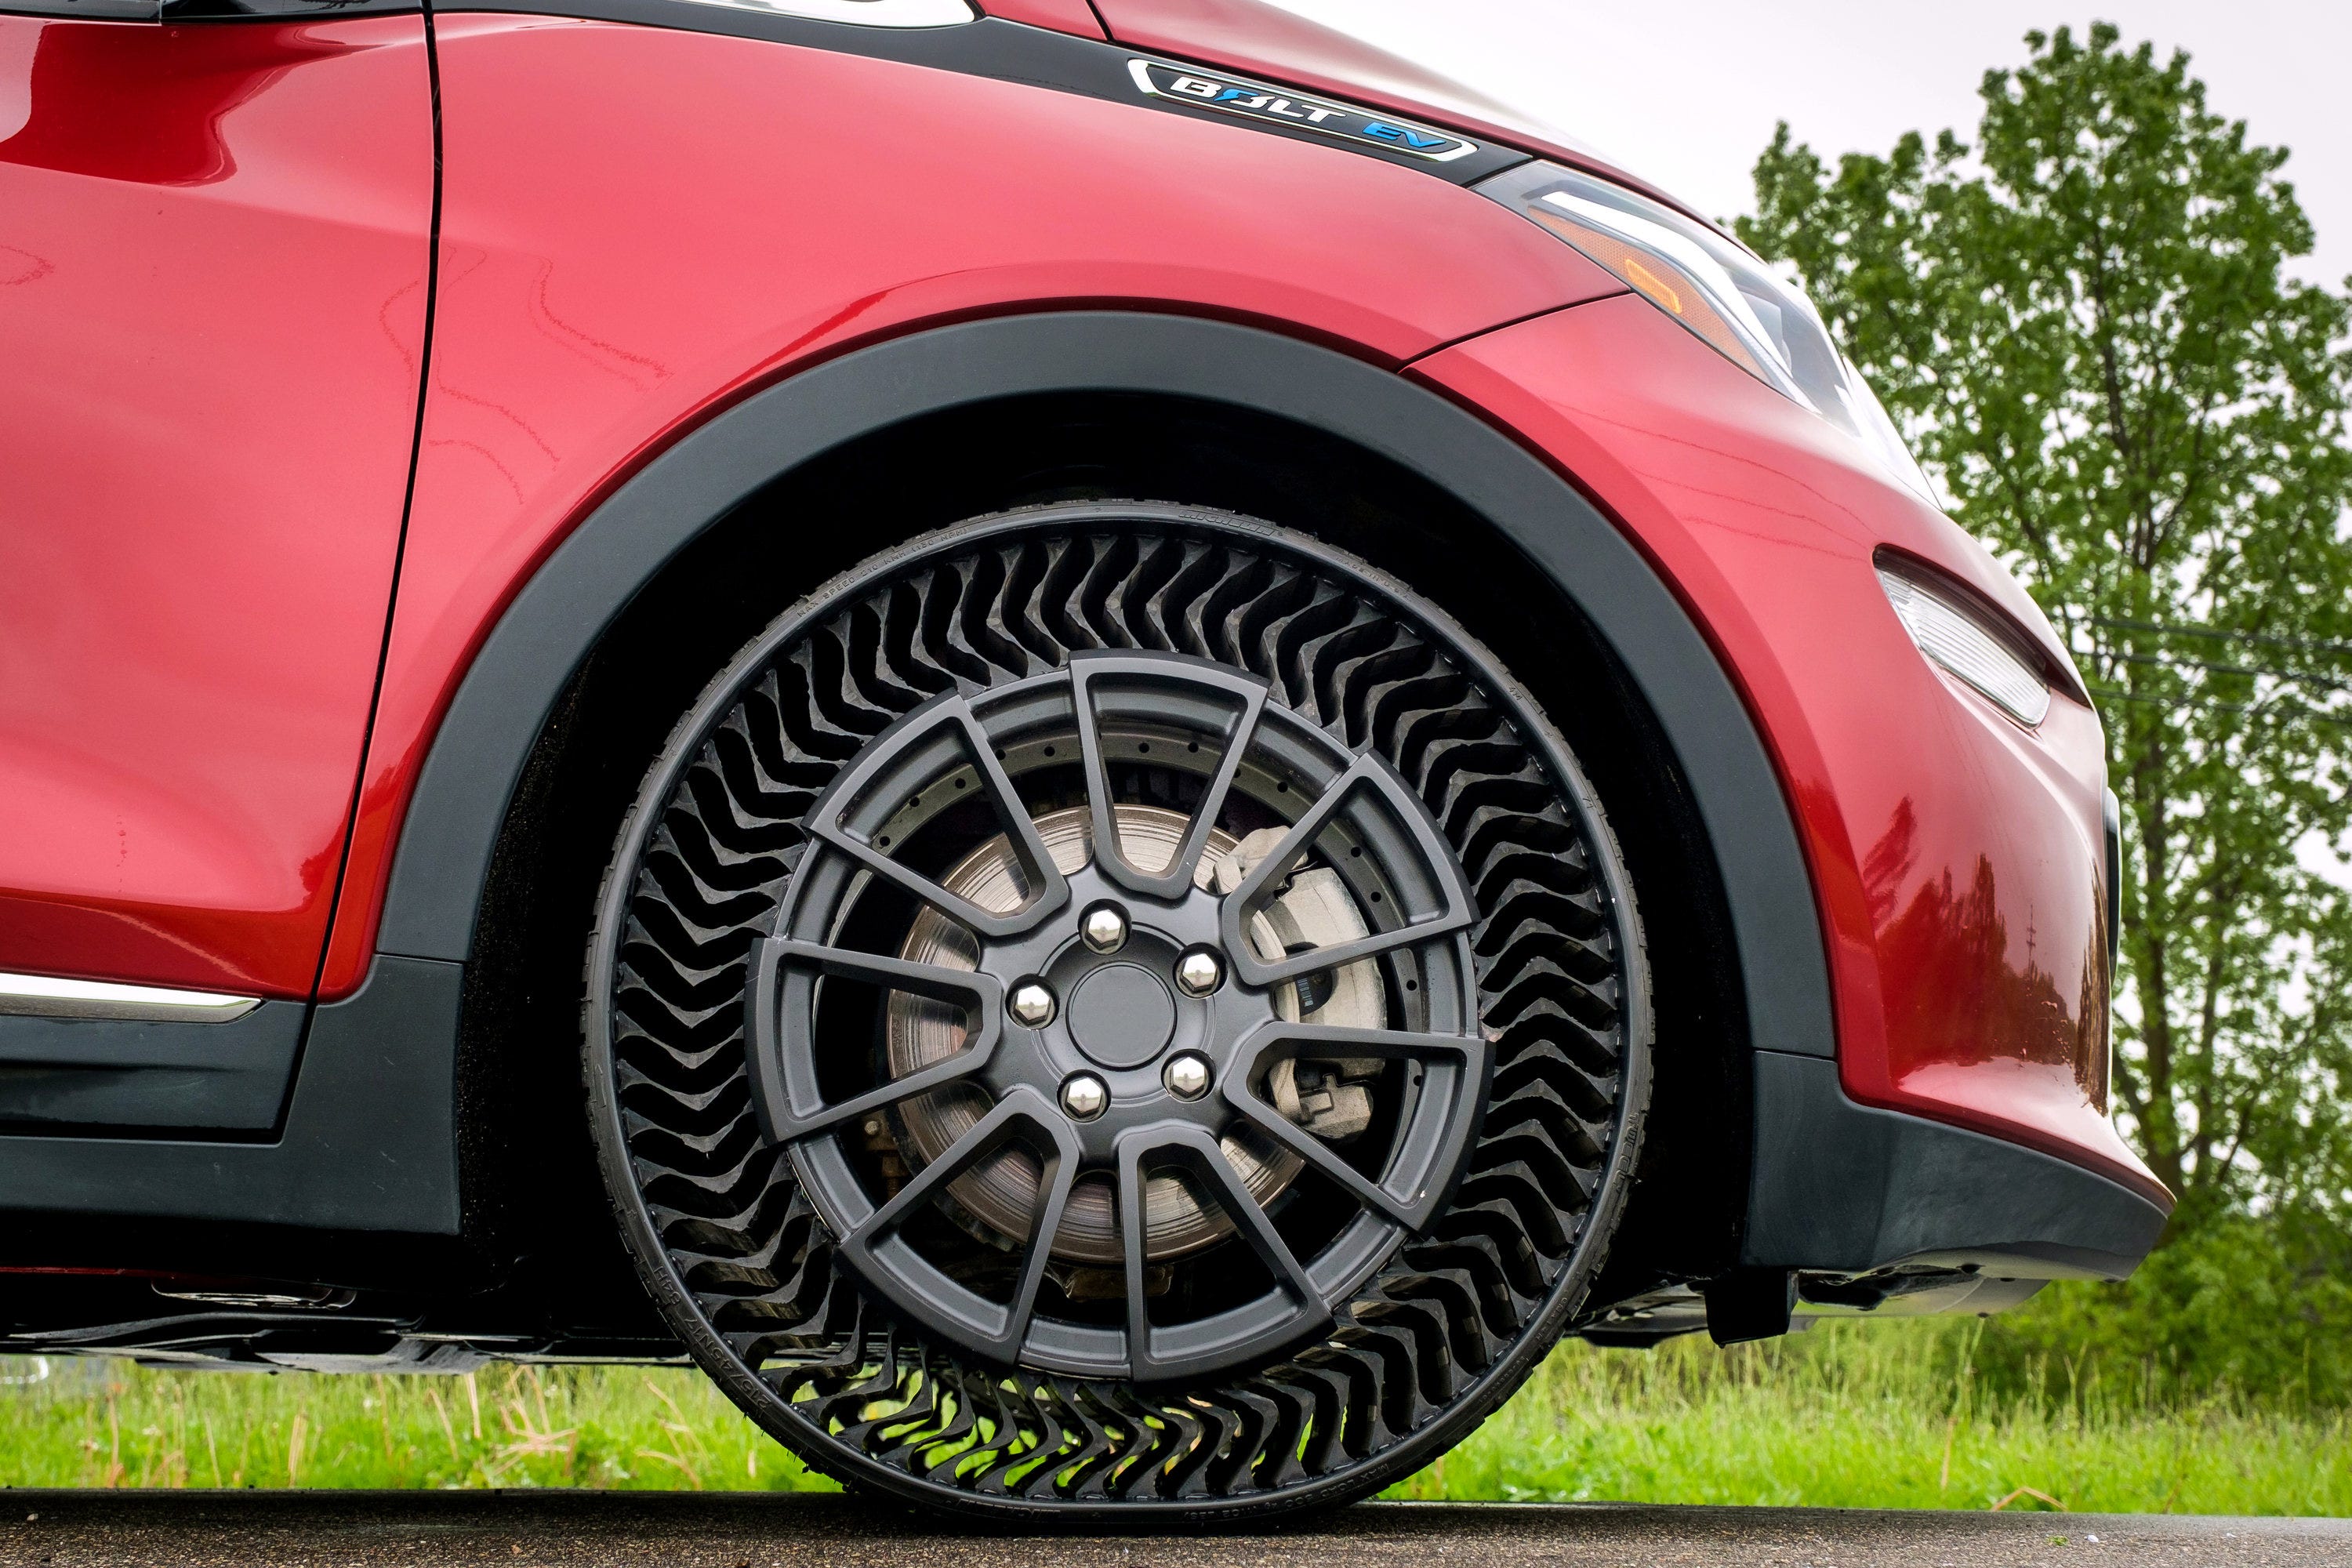 The Michelin Uptis Prototype is tested on a Chevrolet Bolt EV May 29 at the General Motors Milford Proving Ground in Milford.